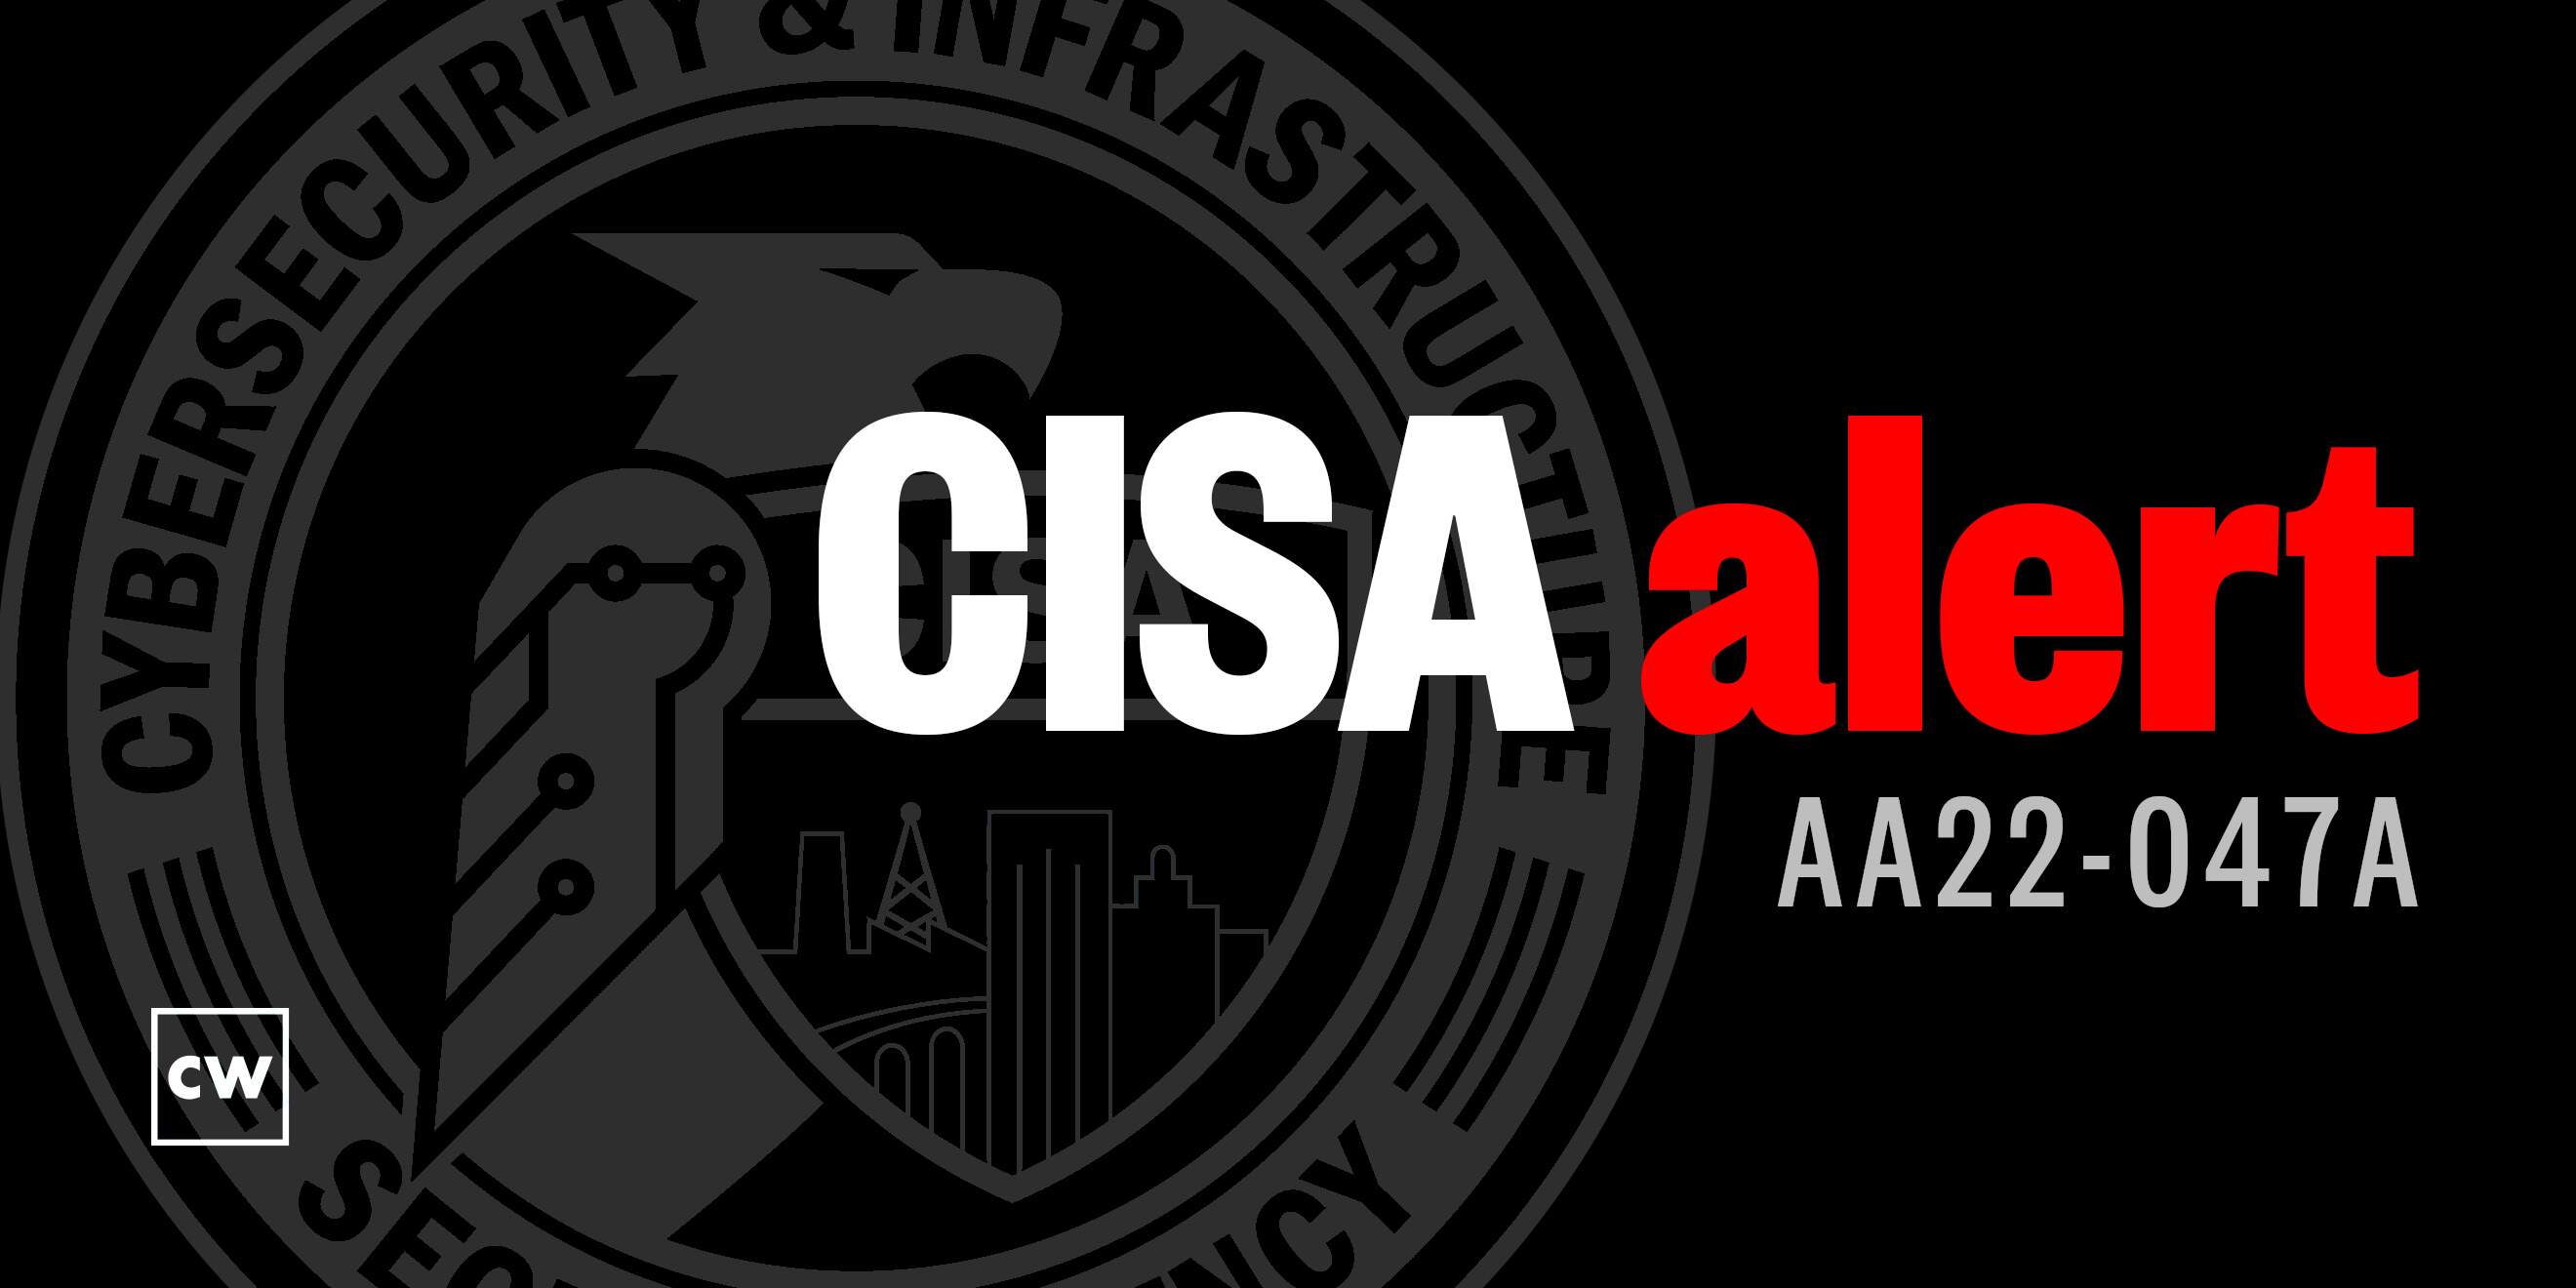 CISA Cybersecurity Alerts 2.16.22